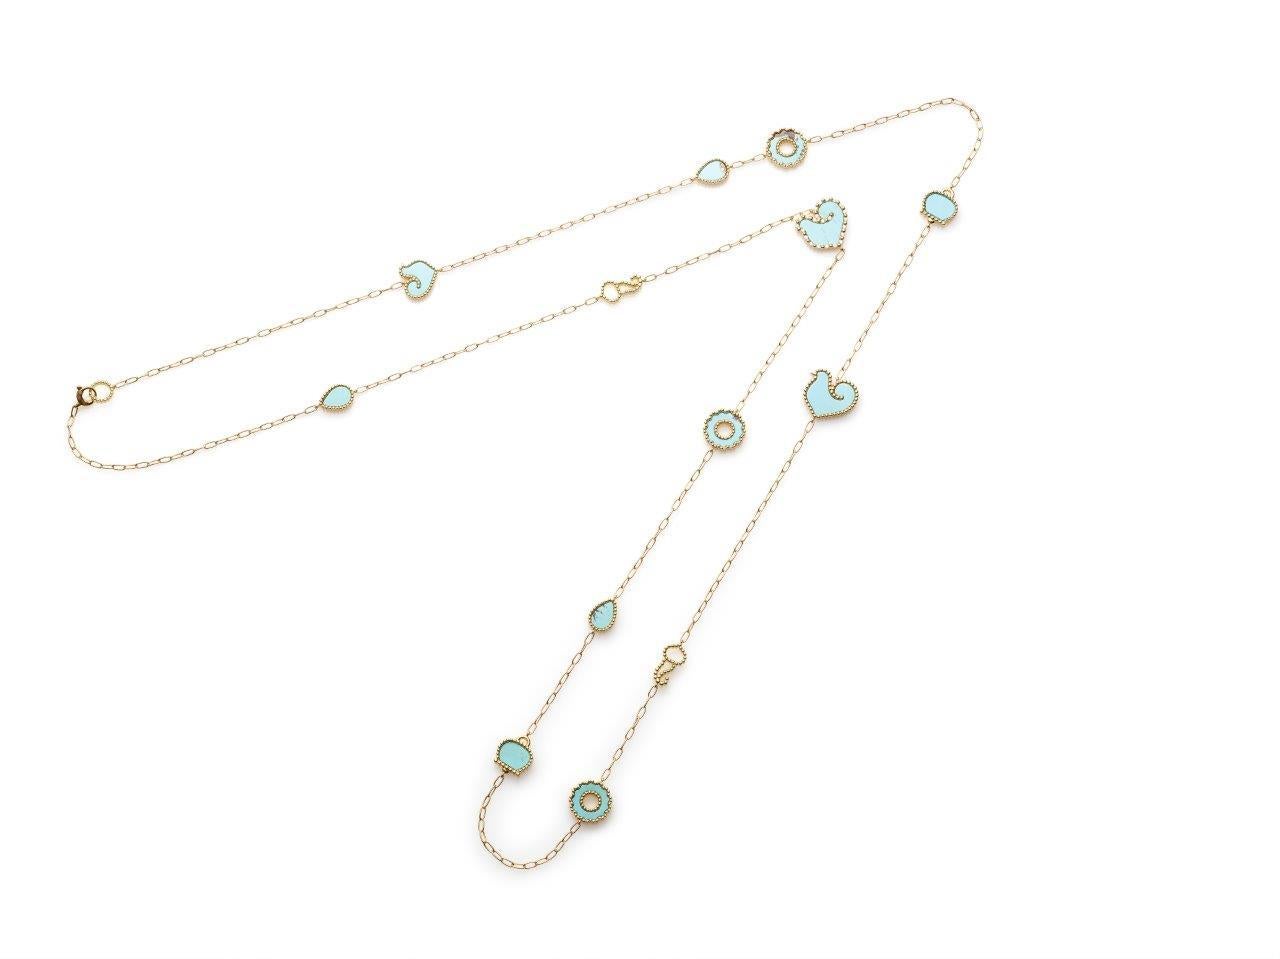 On the occasion of its seventieth anniversary, Chantecler celebrates the essence of the brand, expressed in this collection by iconic symbols and colors. 45 inch long necklace in 18k yellow gold, turquoise and diamonds.